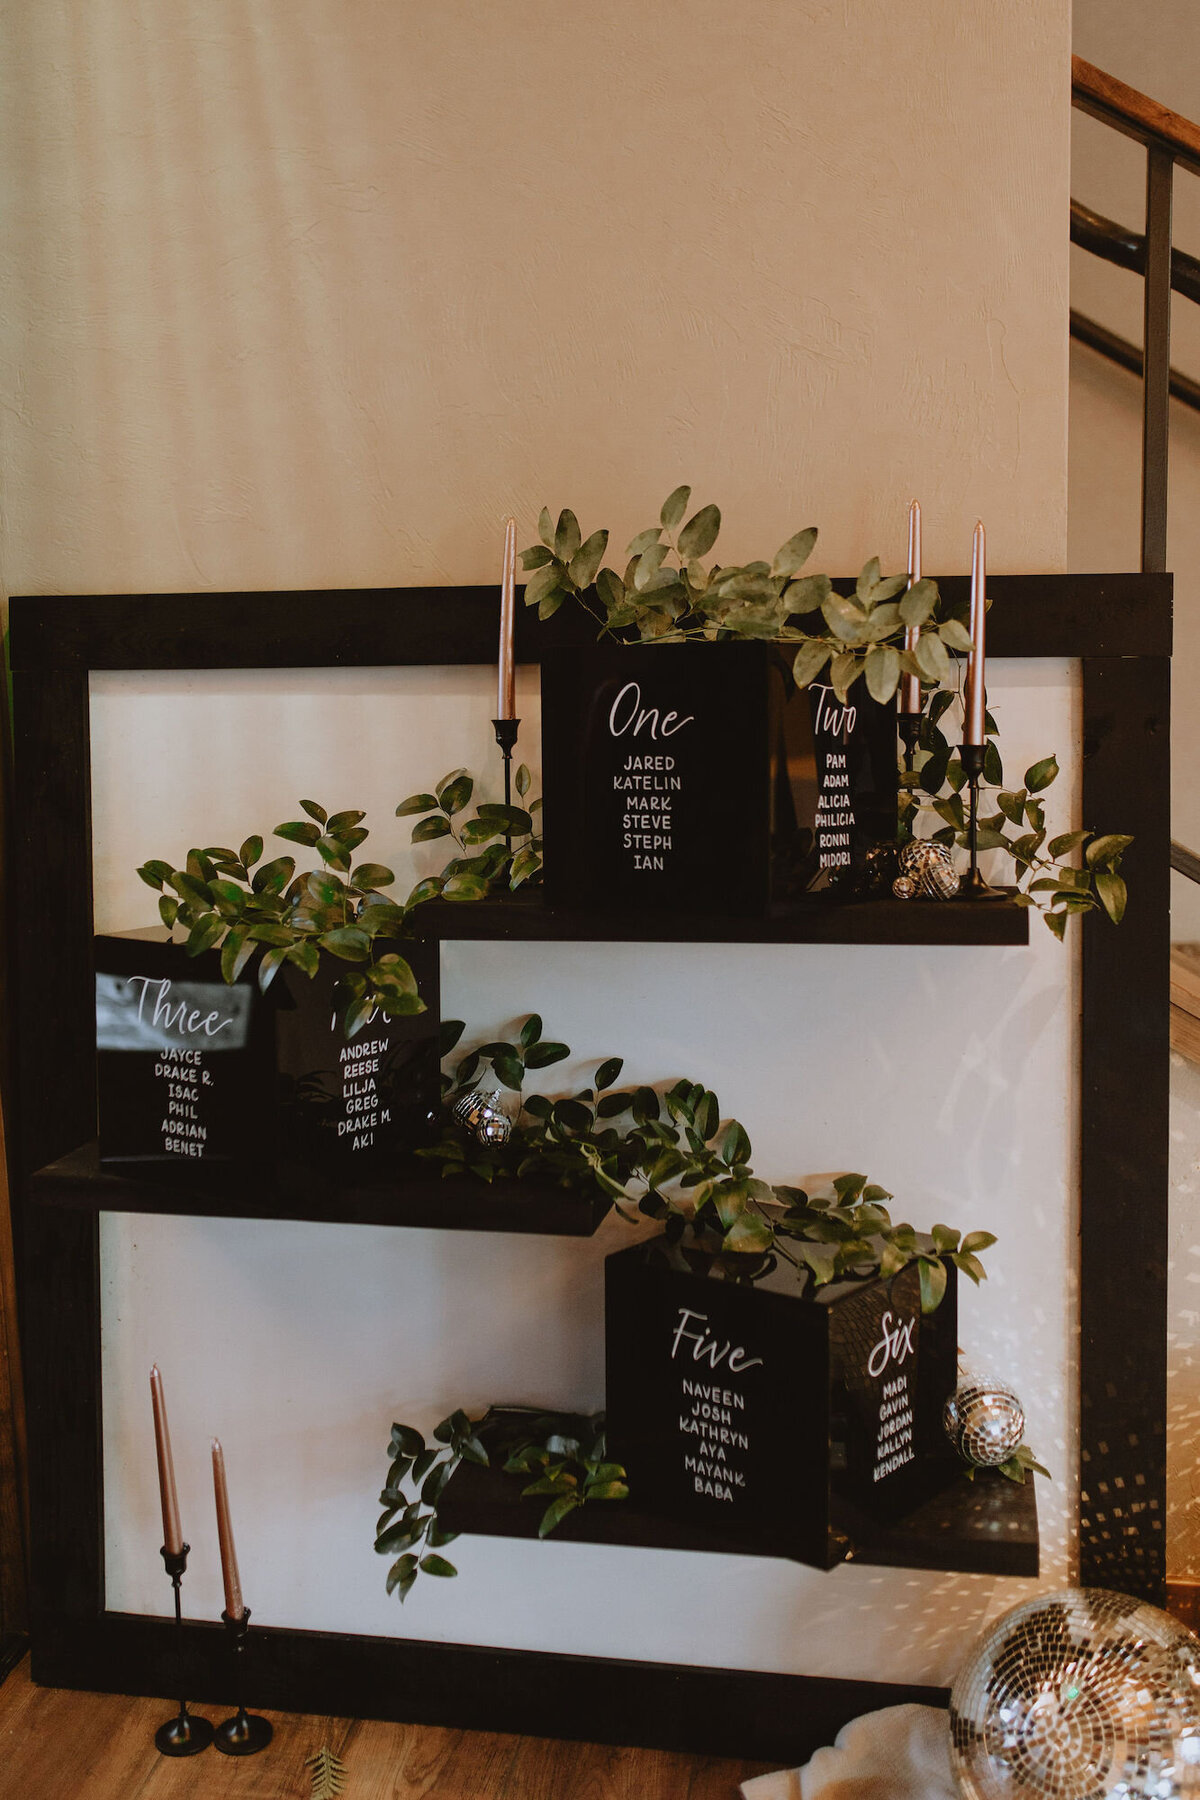 Acrylic box seating chart, black with white calligraphy lettering